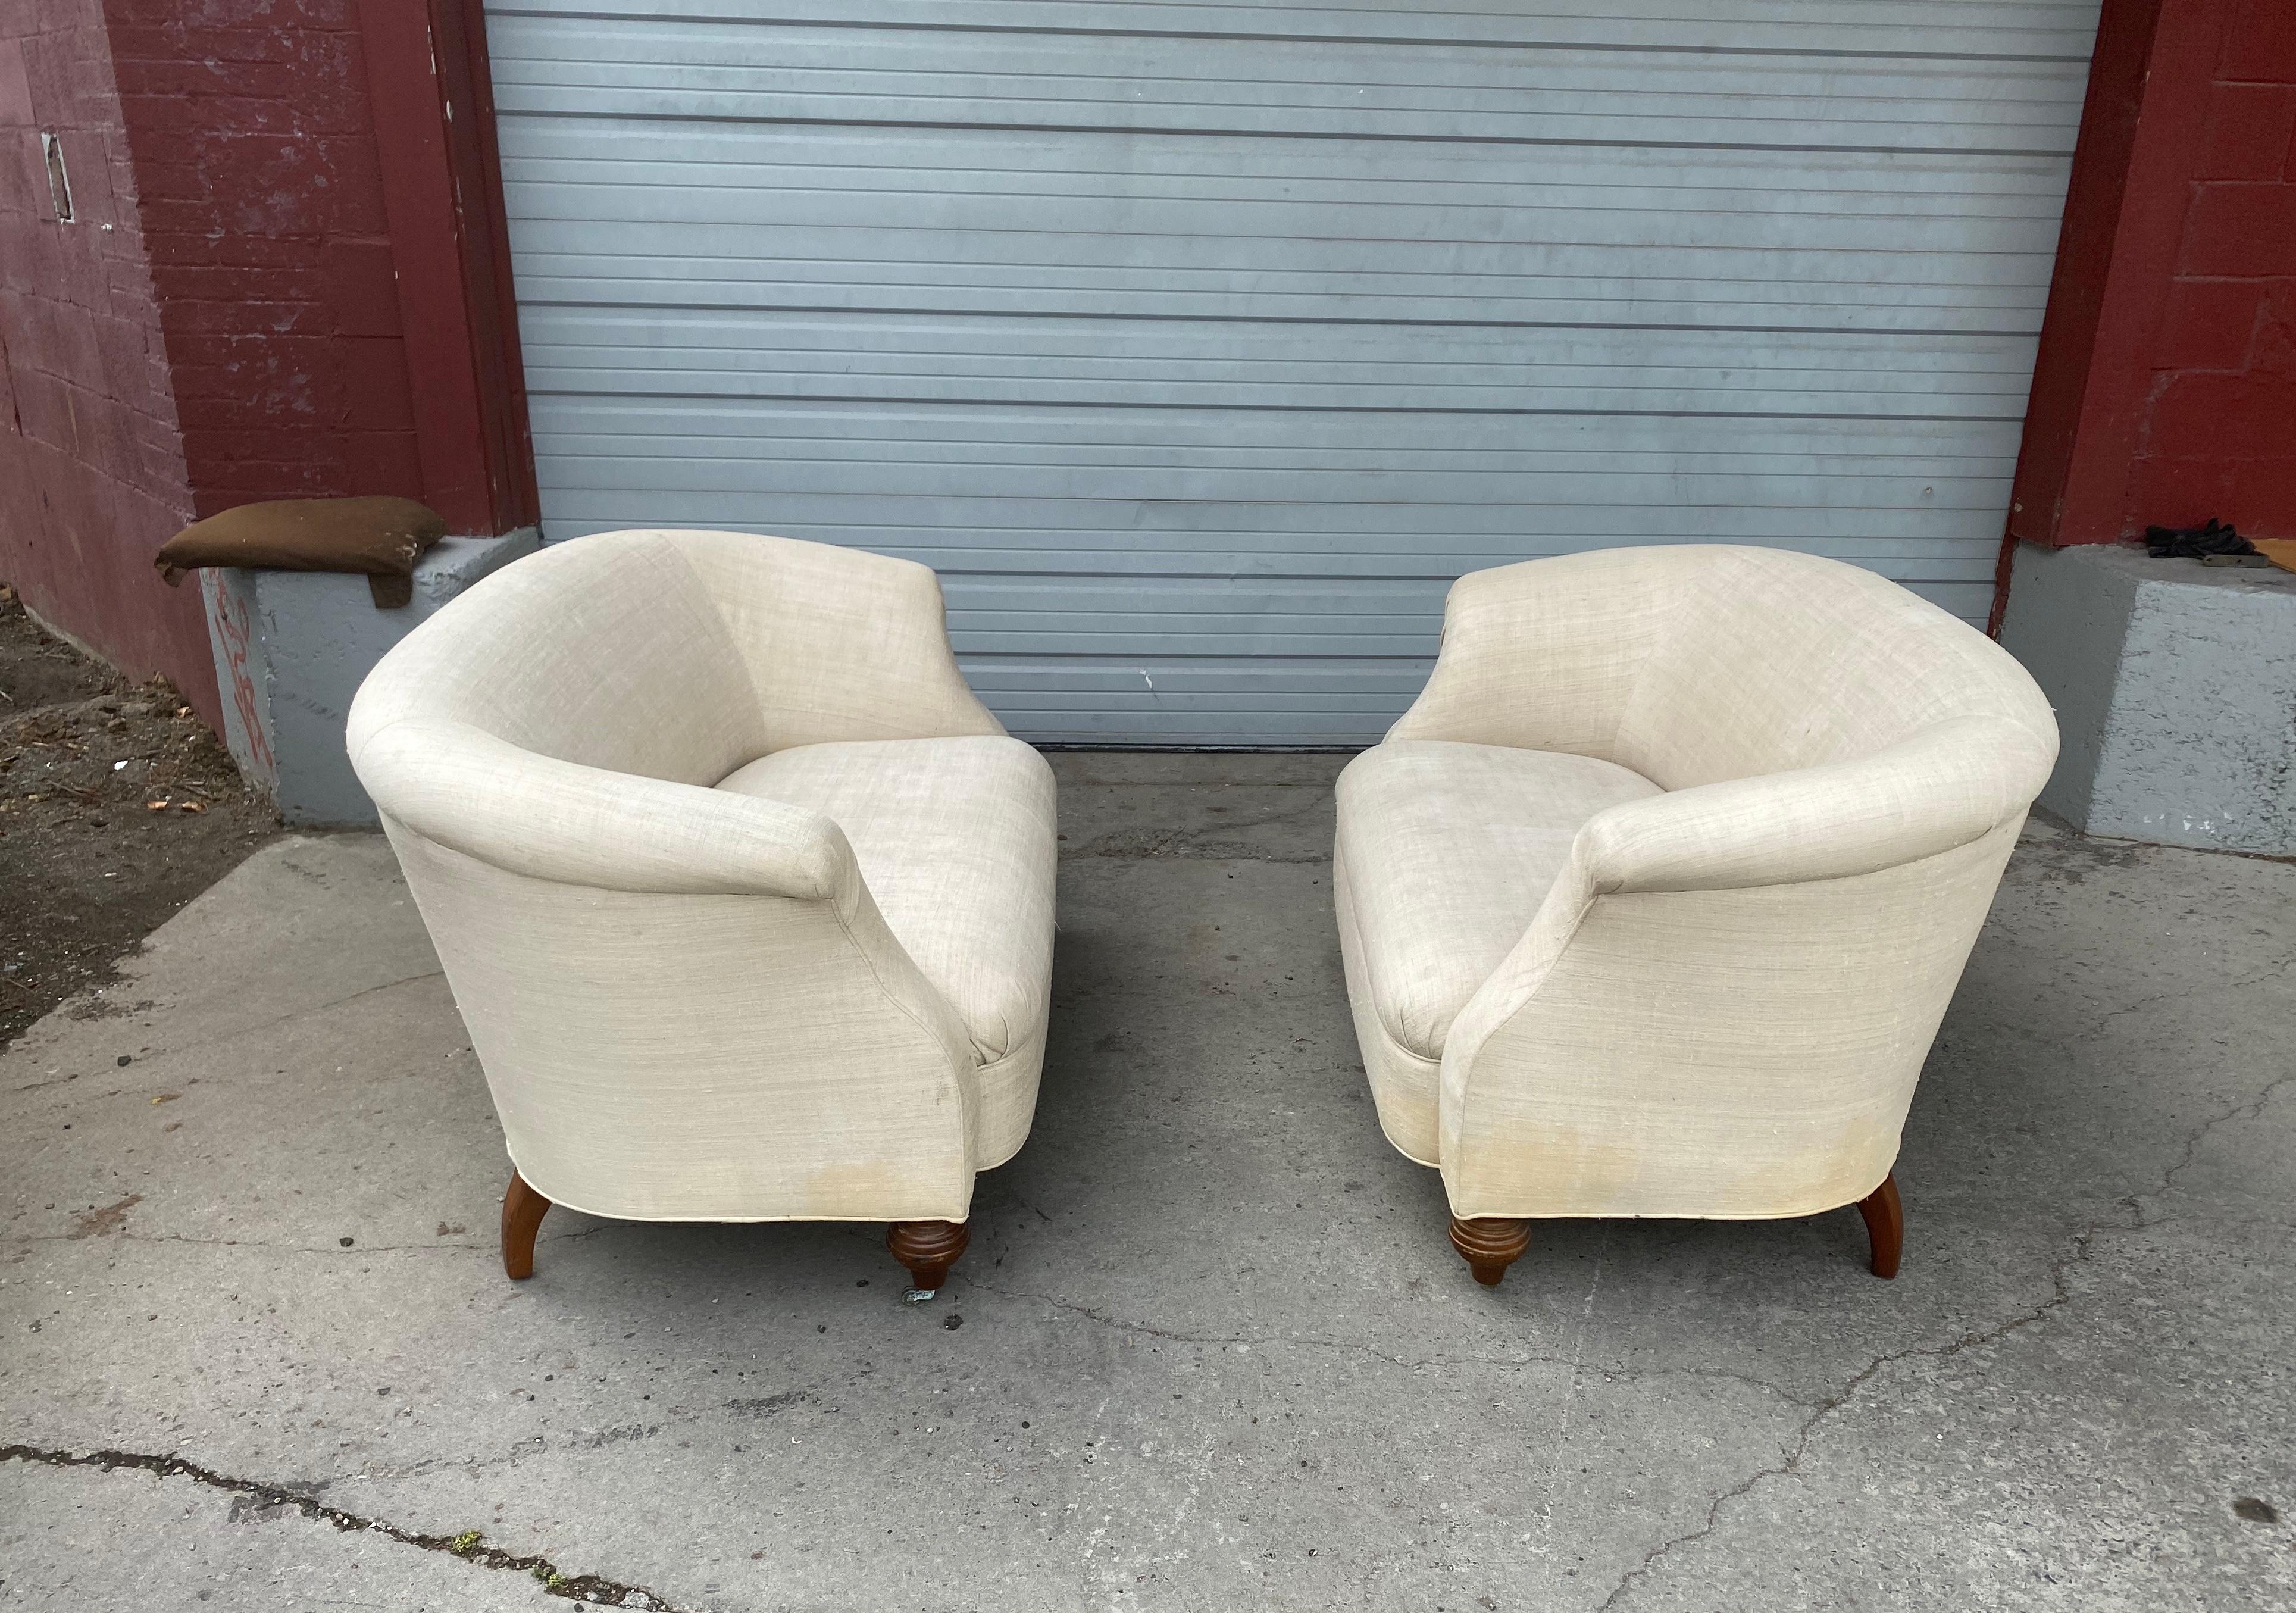 American Wonderful Matched Pair of Victorian Style Sette's, Loveseats, circa 1930s